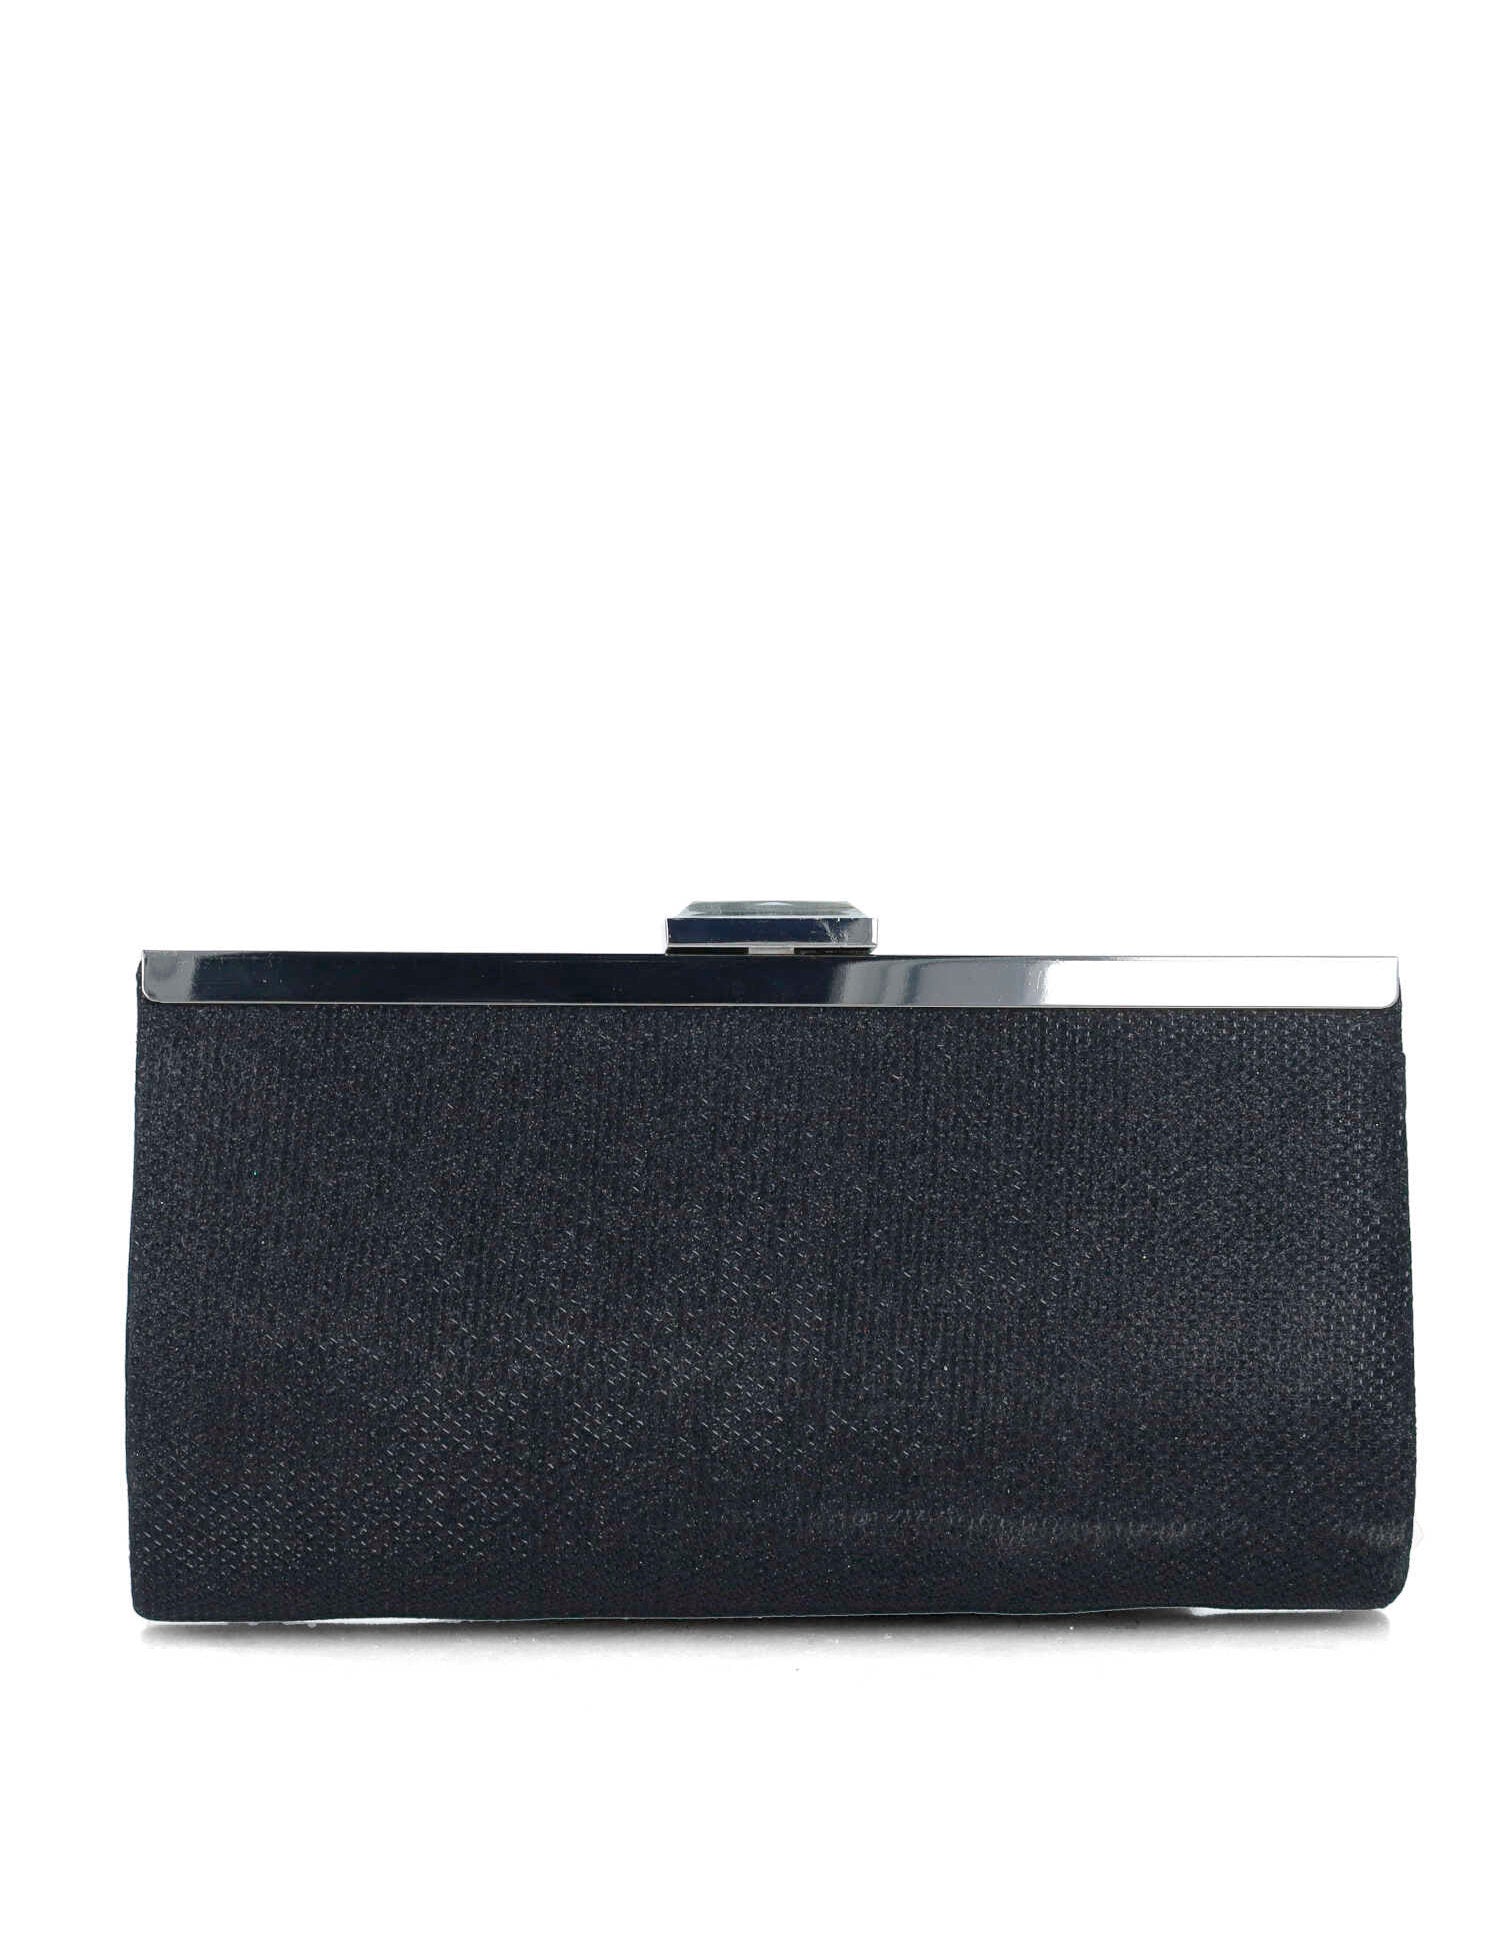 Black Clutch With Silver Hardware_85511_01_03